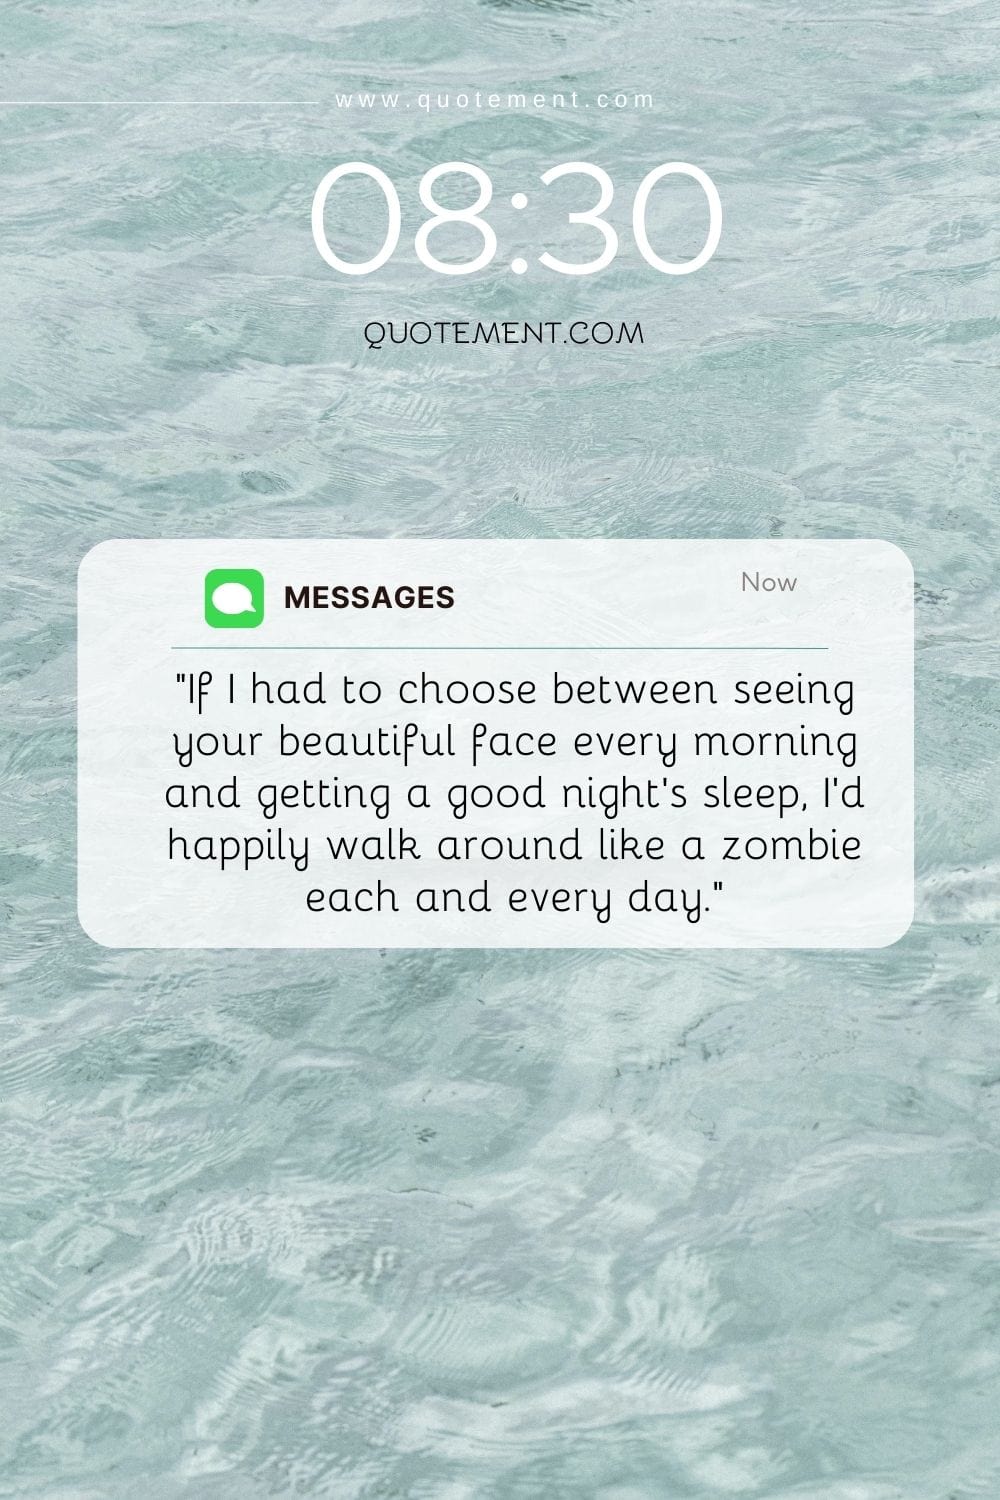 message on a phone screen with crystal crystal-clear water image